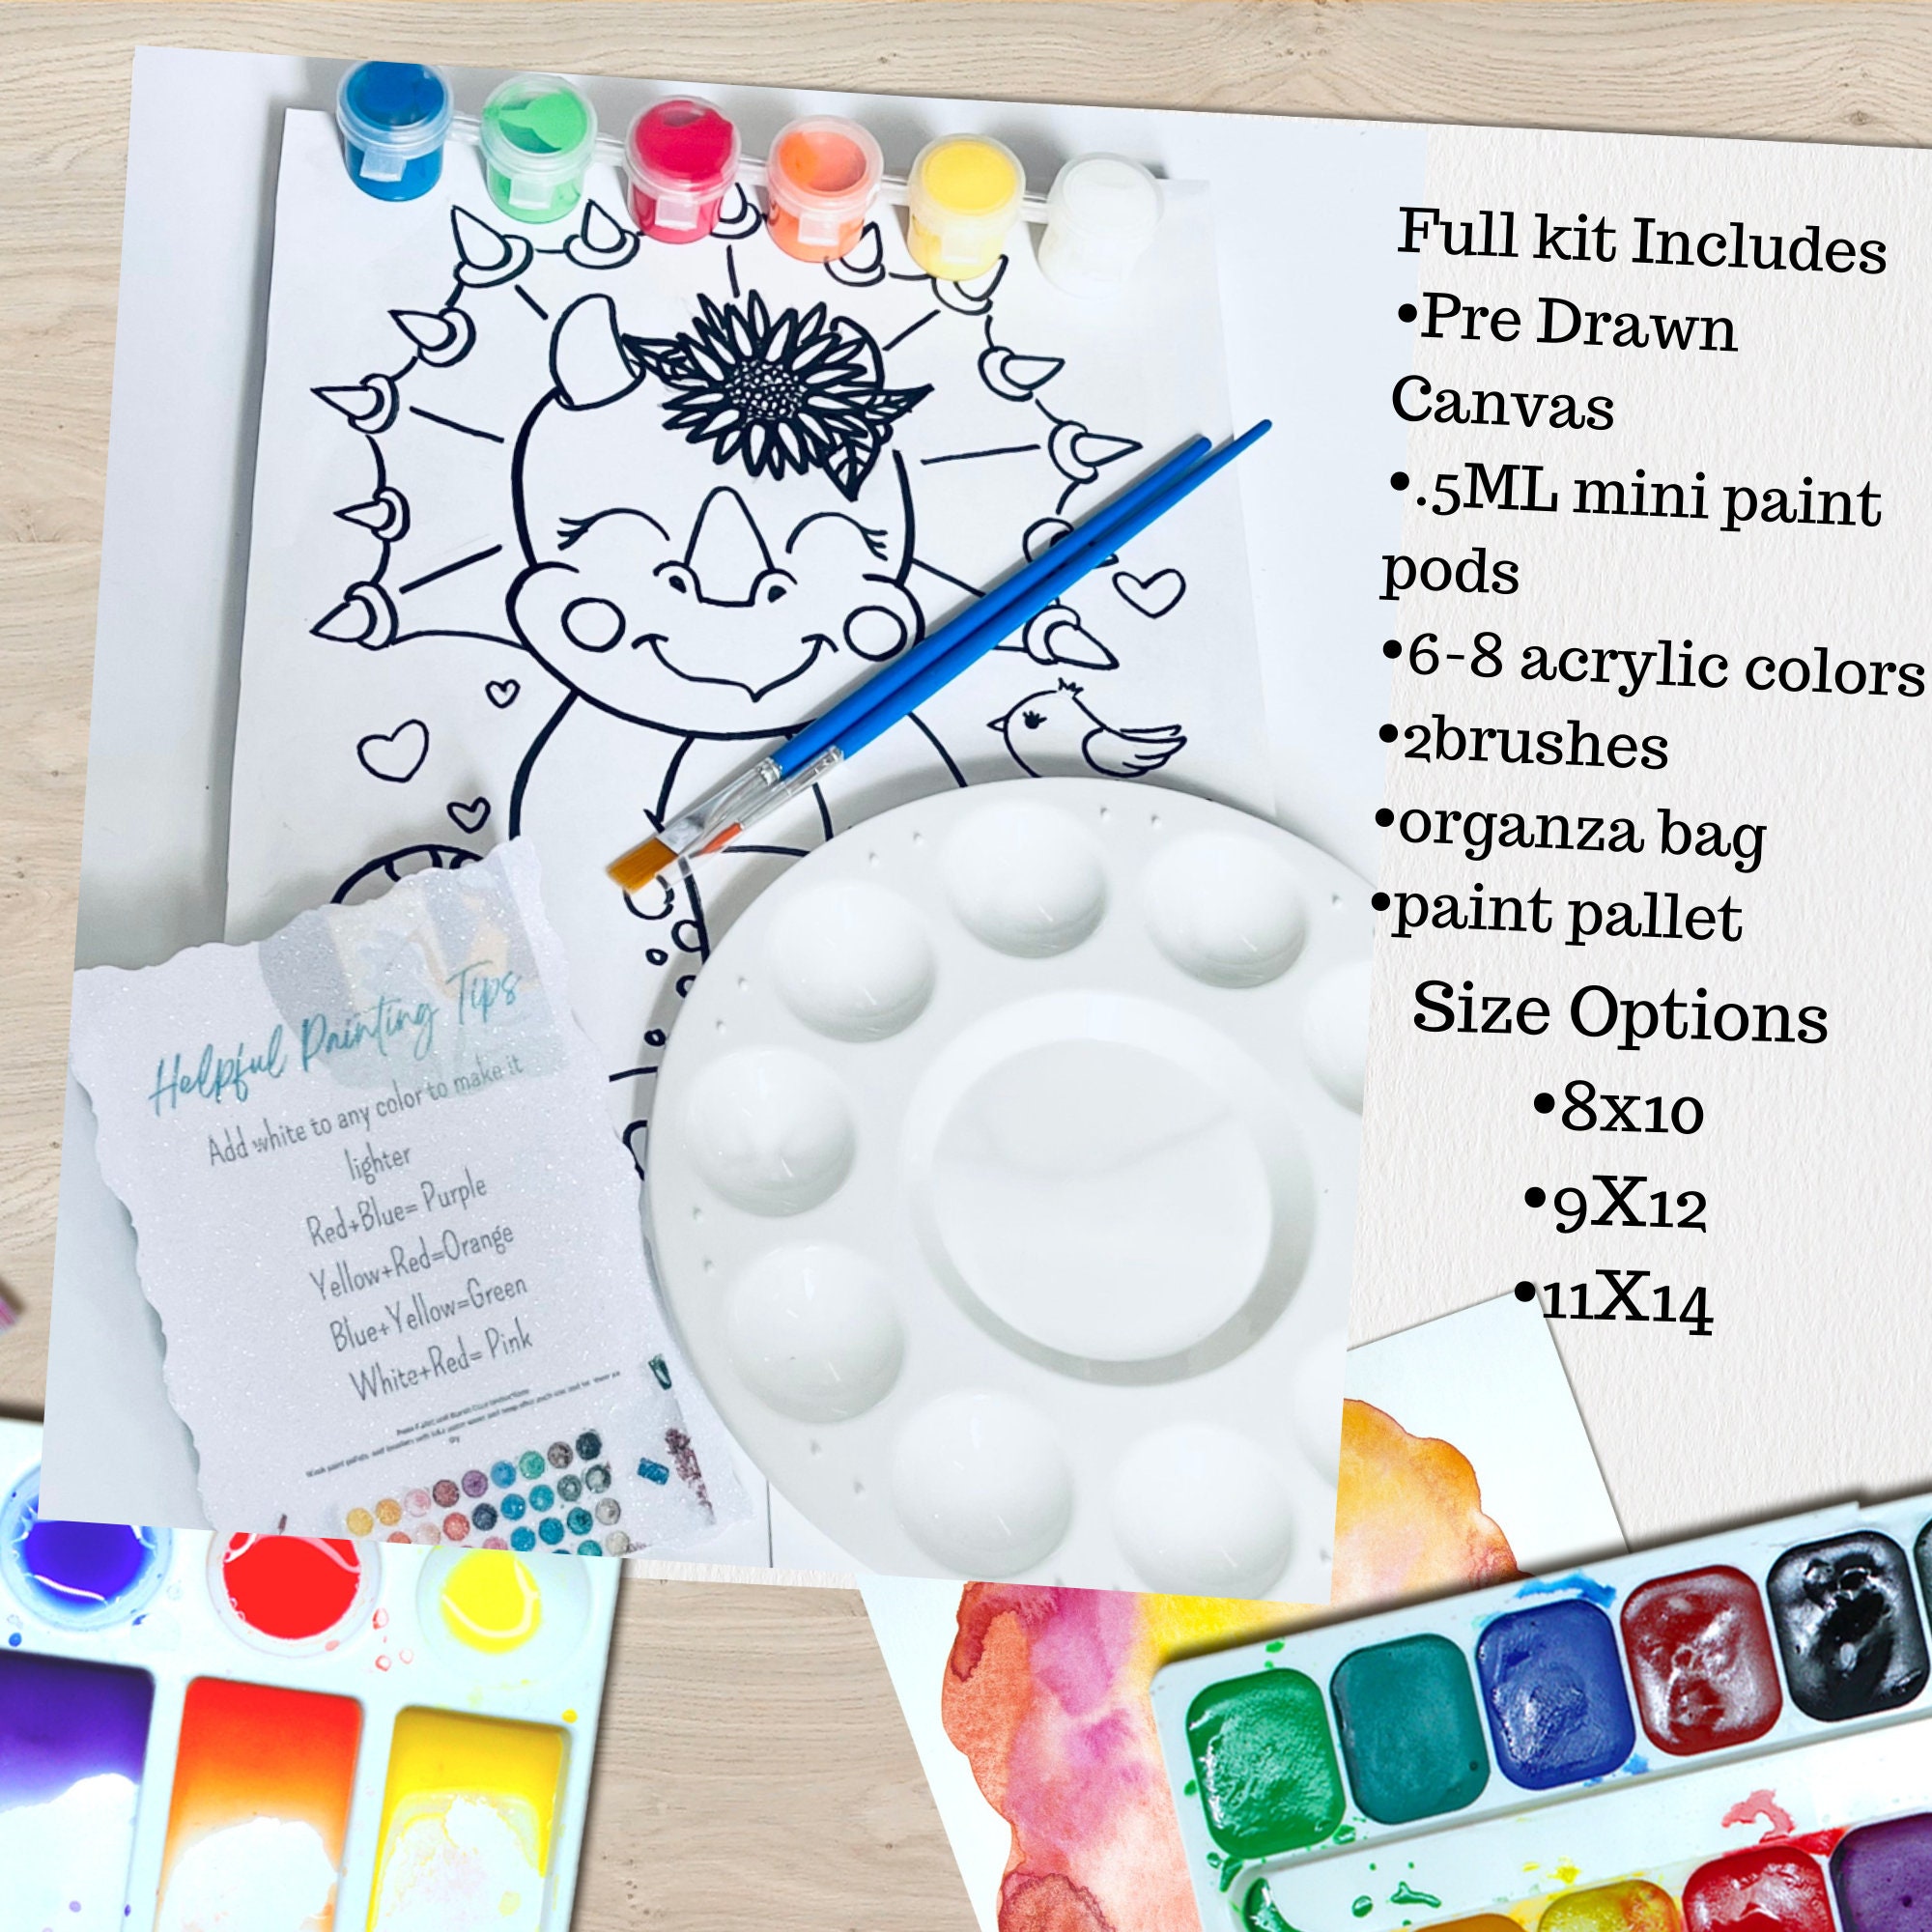 6 Sip and Paint Canvas, Pre Drawn Canvas, Paint Kit in Bulk, Outlined Canvas,  Flowers Canvas Kit, 